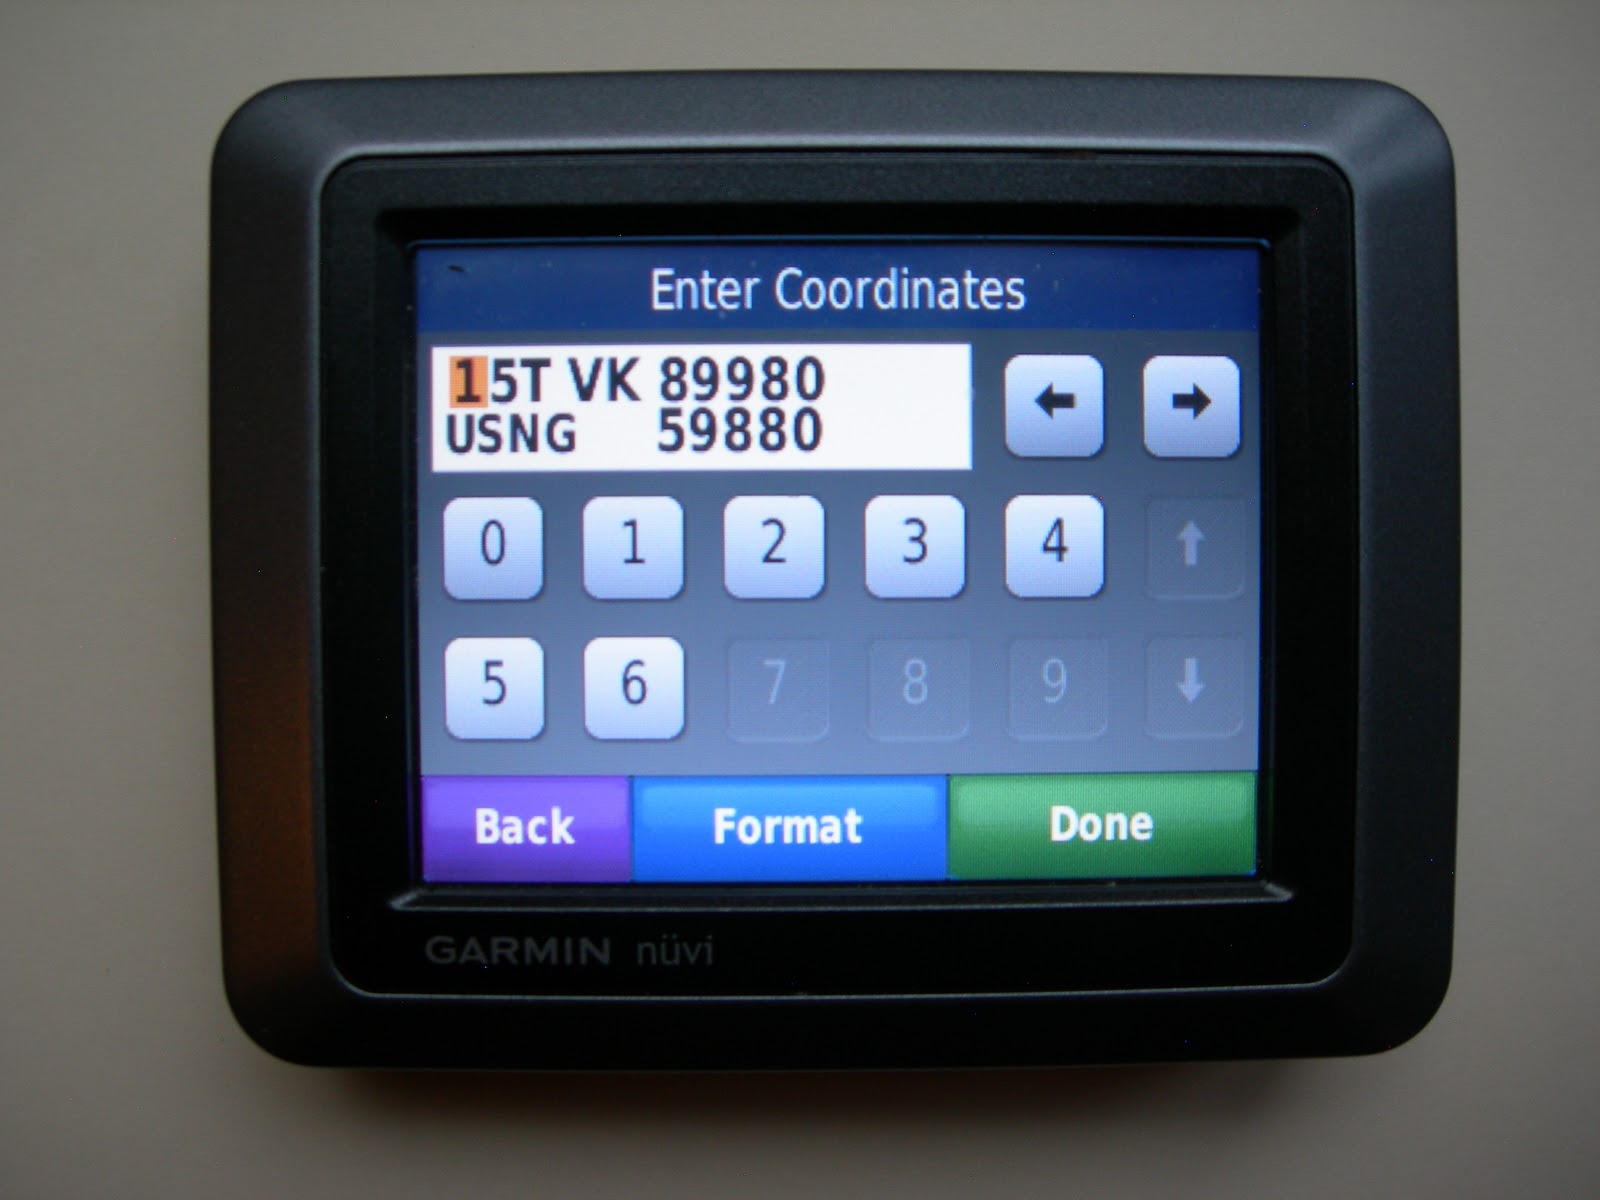 Updates ~ ~ ~: Garmin the Number of Units With USNG Capability